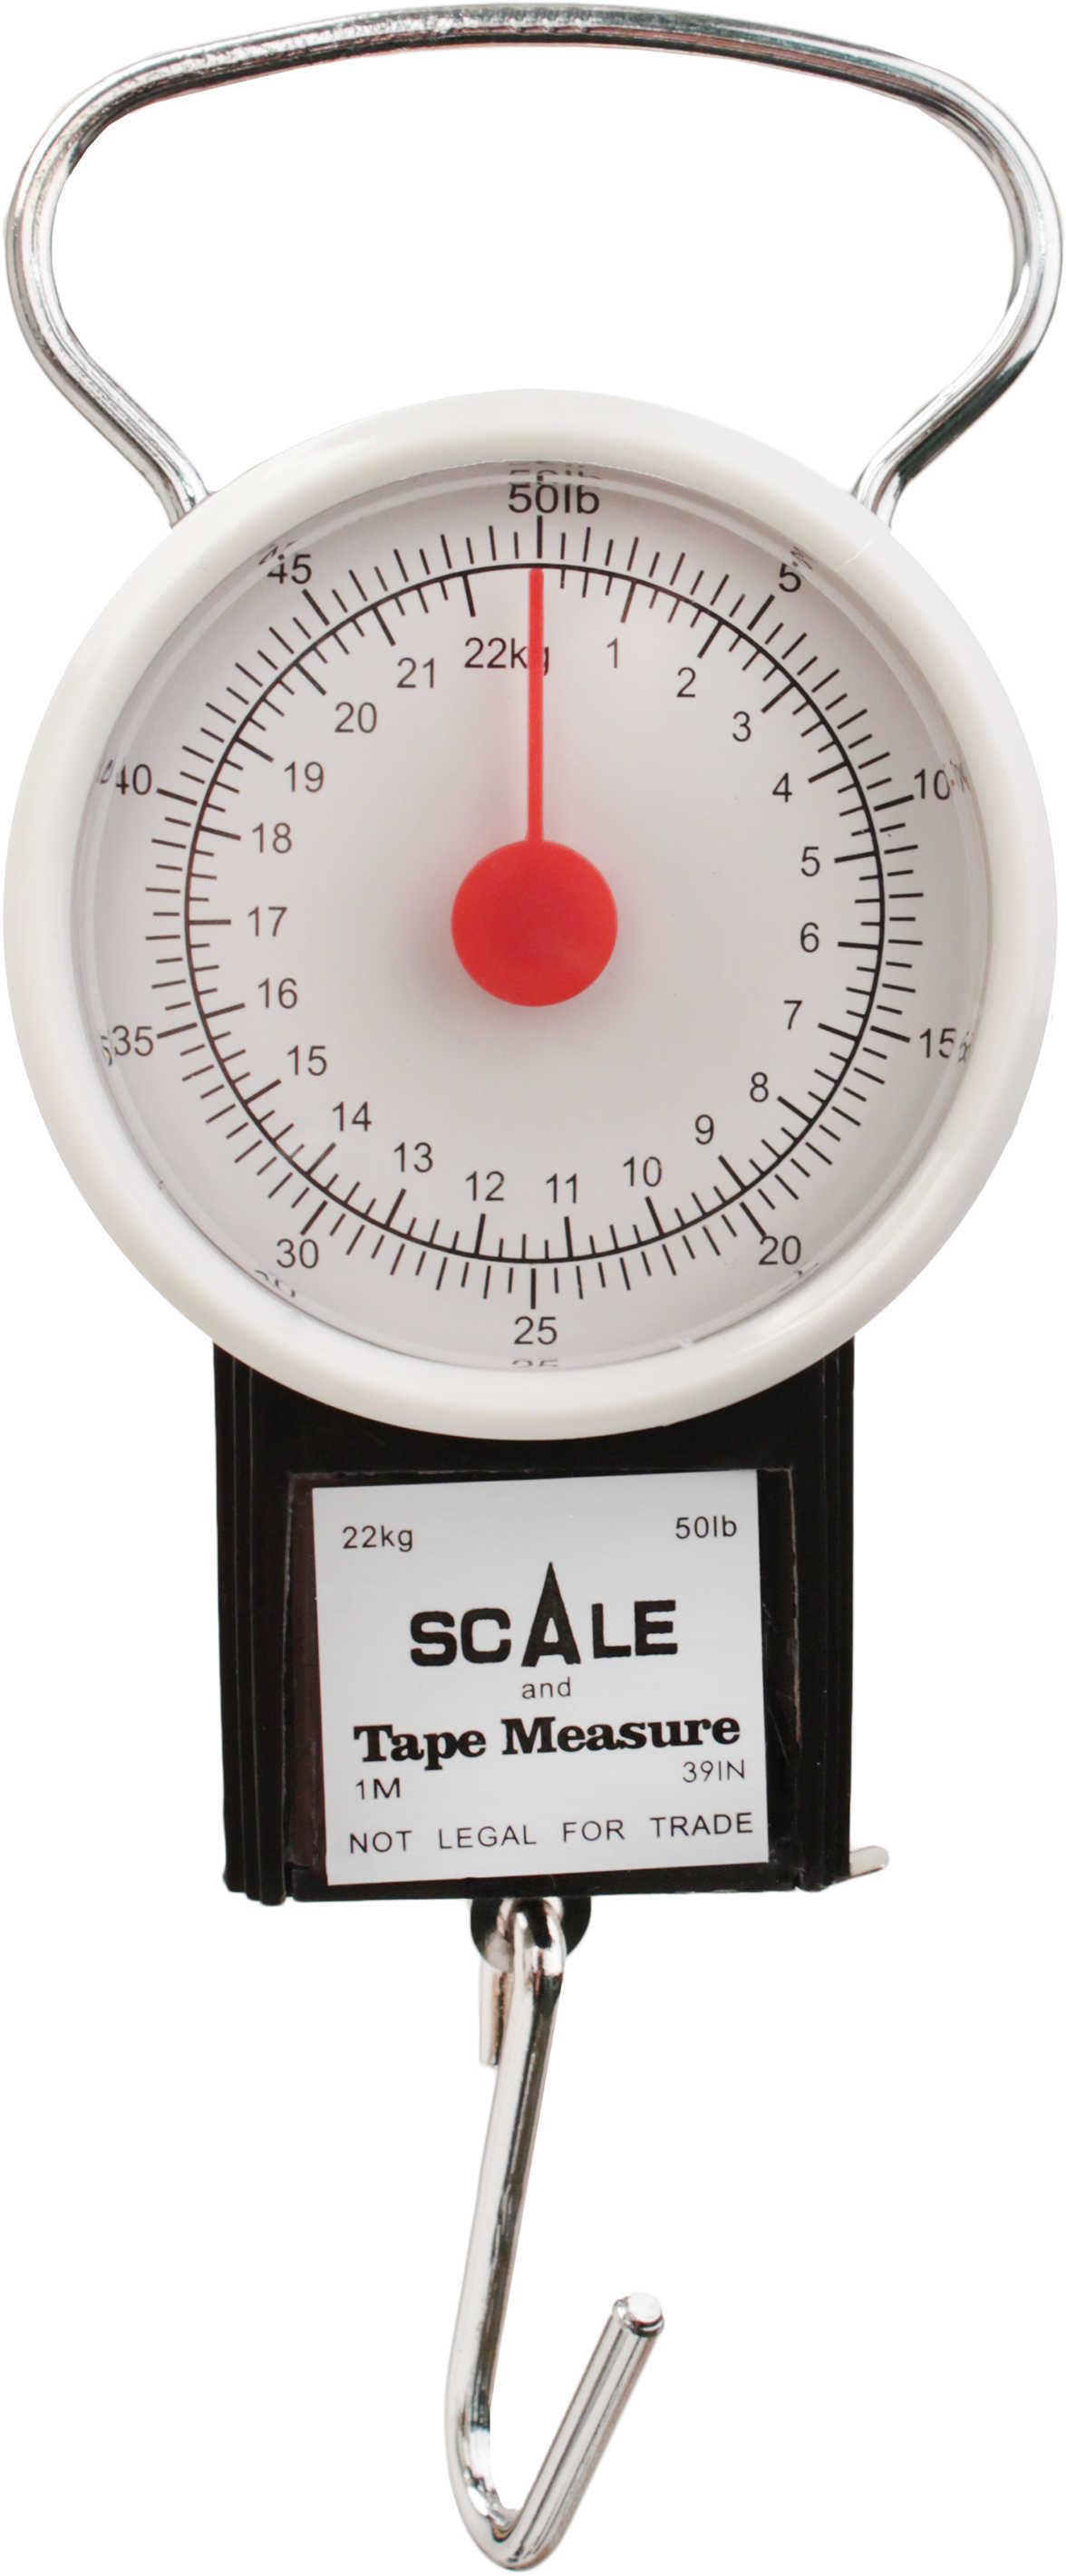 Eagle Claw Fishing Tackle Scale w/Tape Measure 50 lb, Digital Md: 04070-003